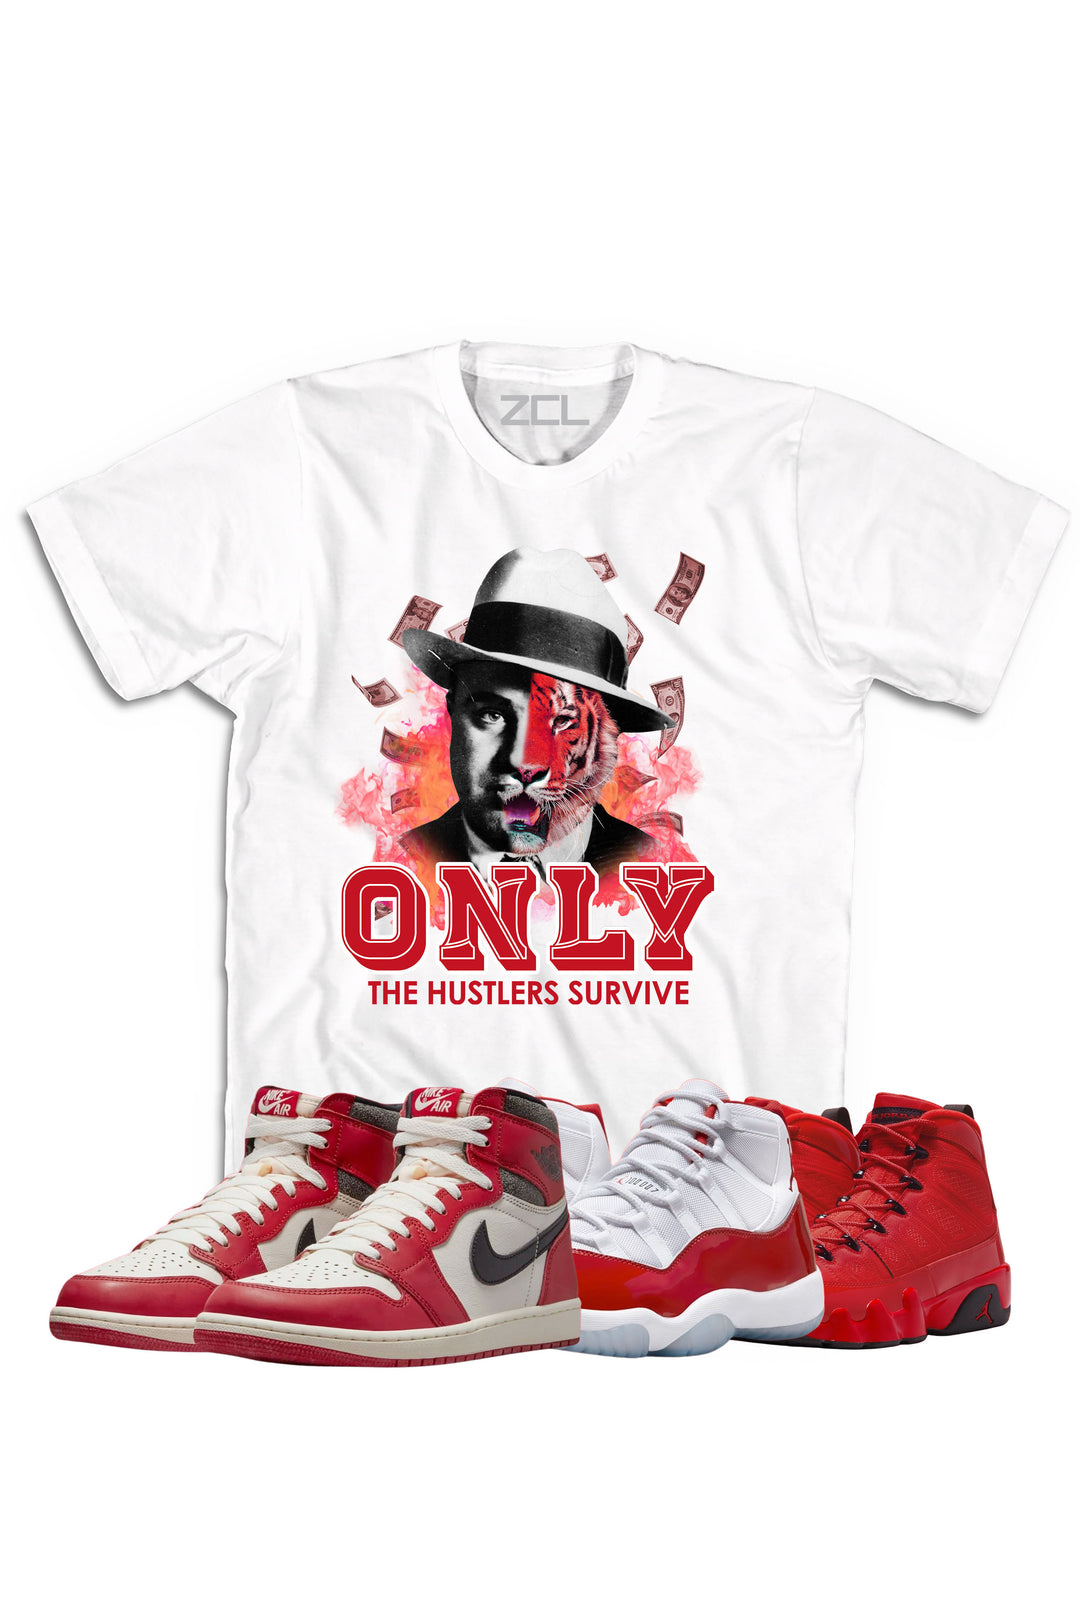 Air Jordan "Only Hustlers Survive" Tee Lost & Found - Cherry Red - Zamage